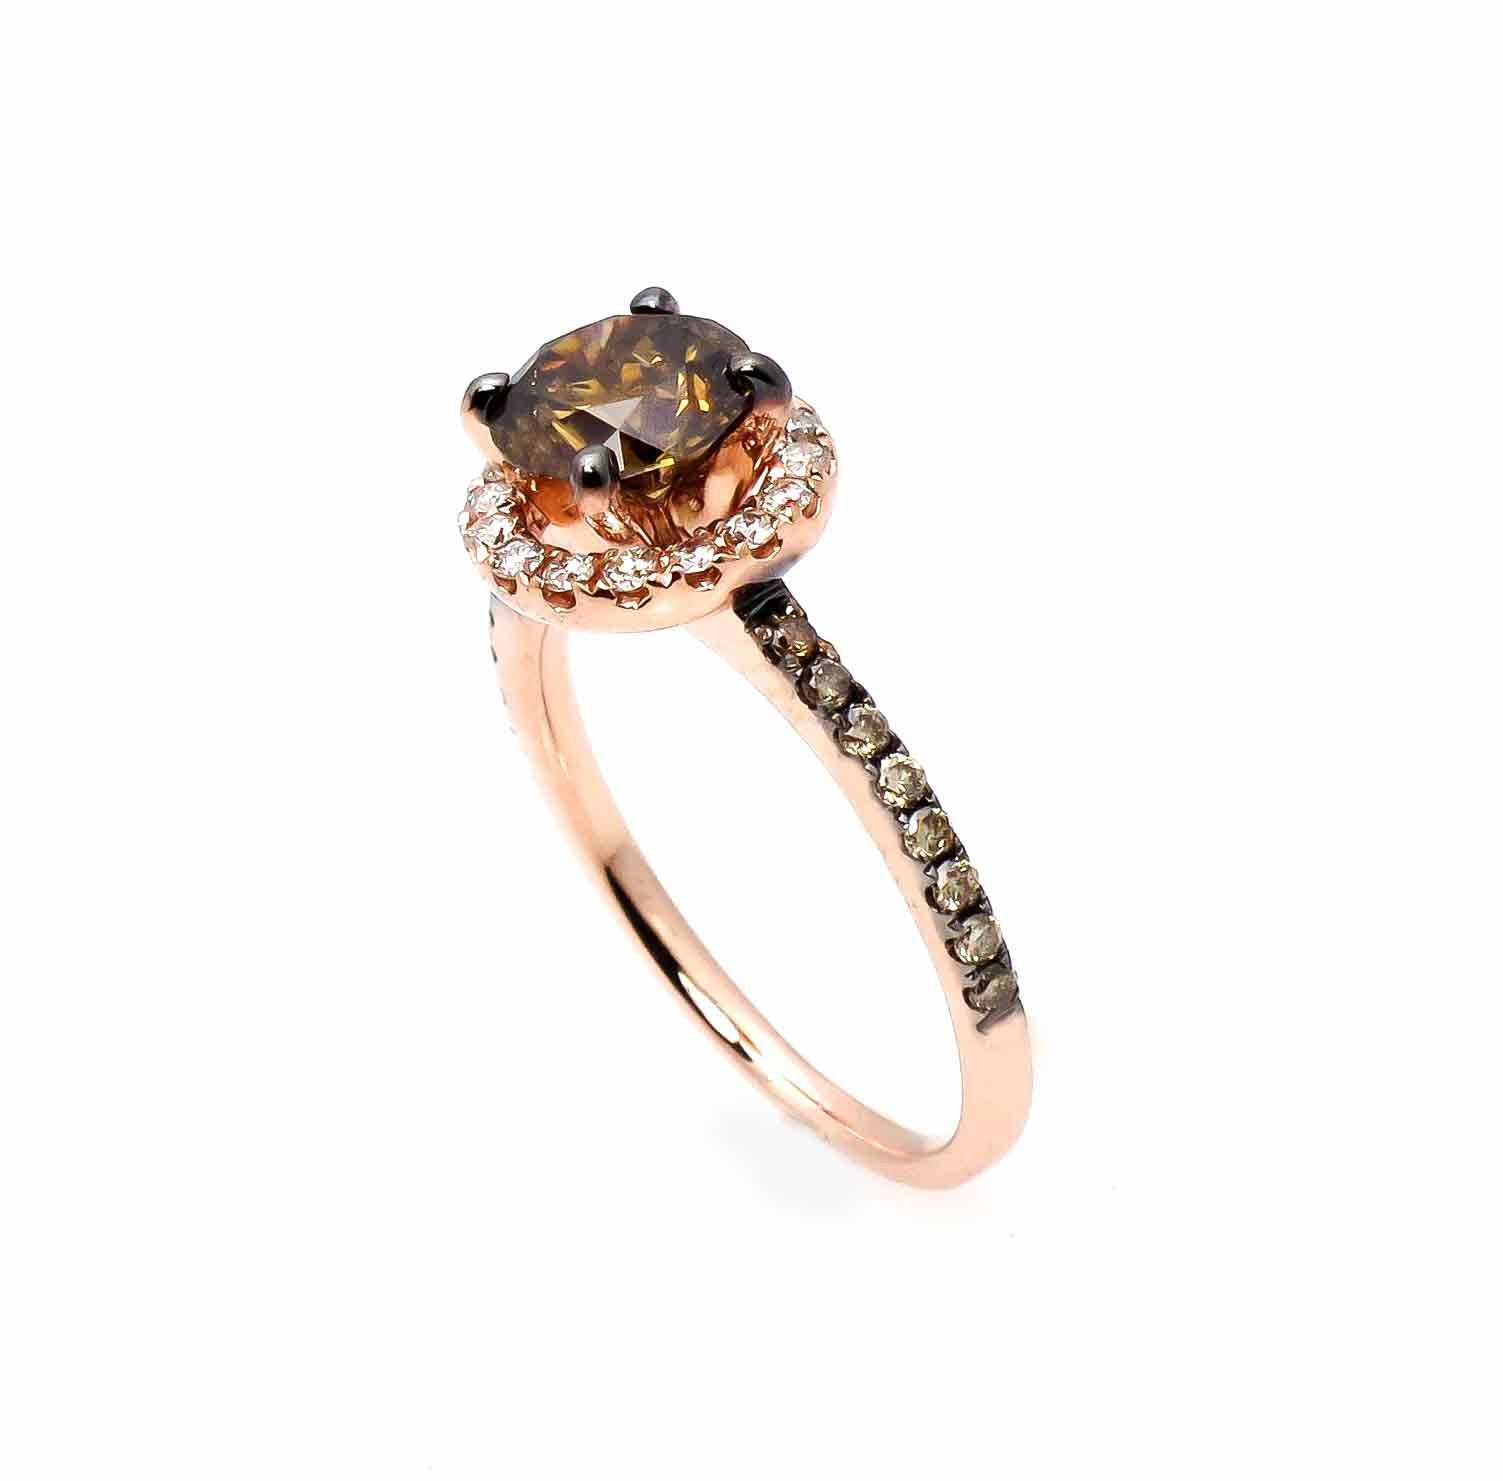 1 Carat Fancy Brown Diamond Halo, White Diamond Accent Stones, Rose Gold, Engagement Ring, Anniversary Ring - BD94639A